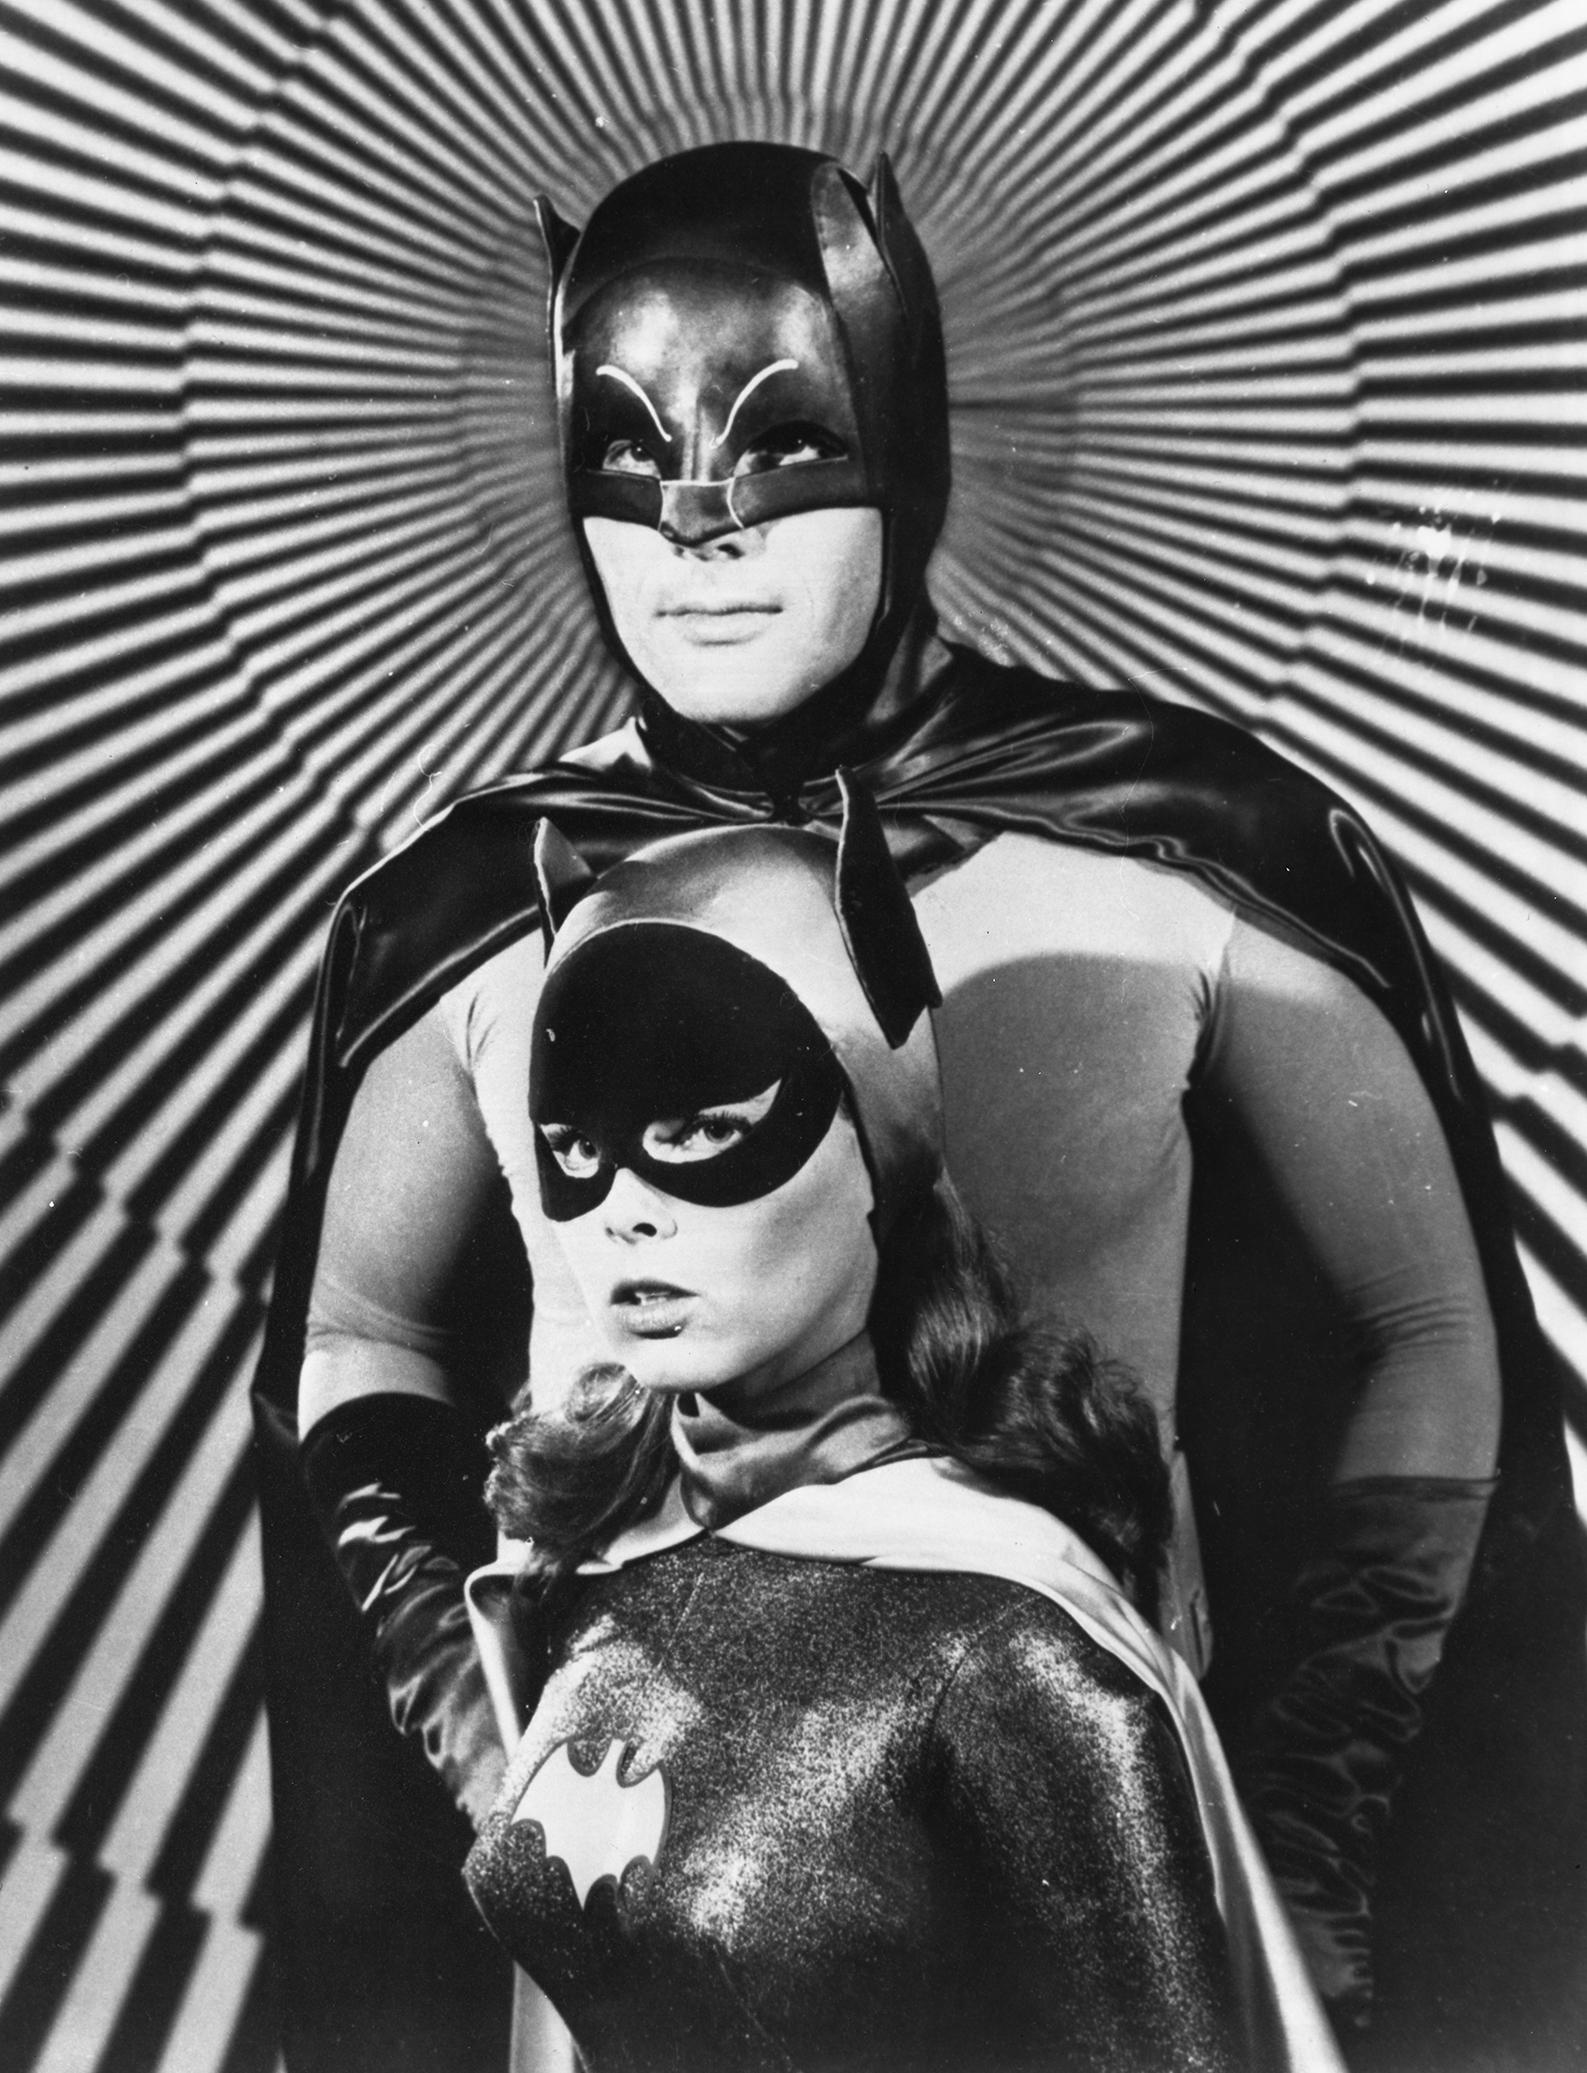 Unknown Black and White Photograph - Batman and Batgirl Classical Portrait